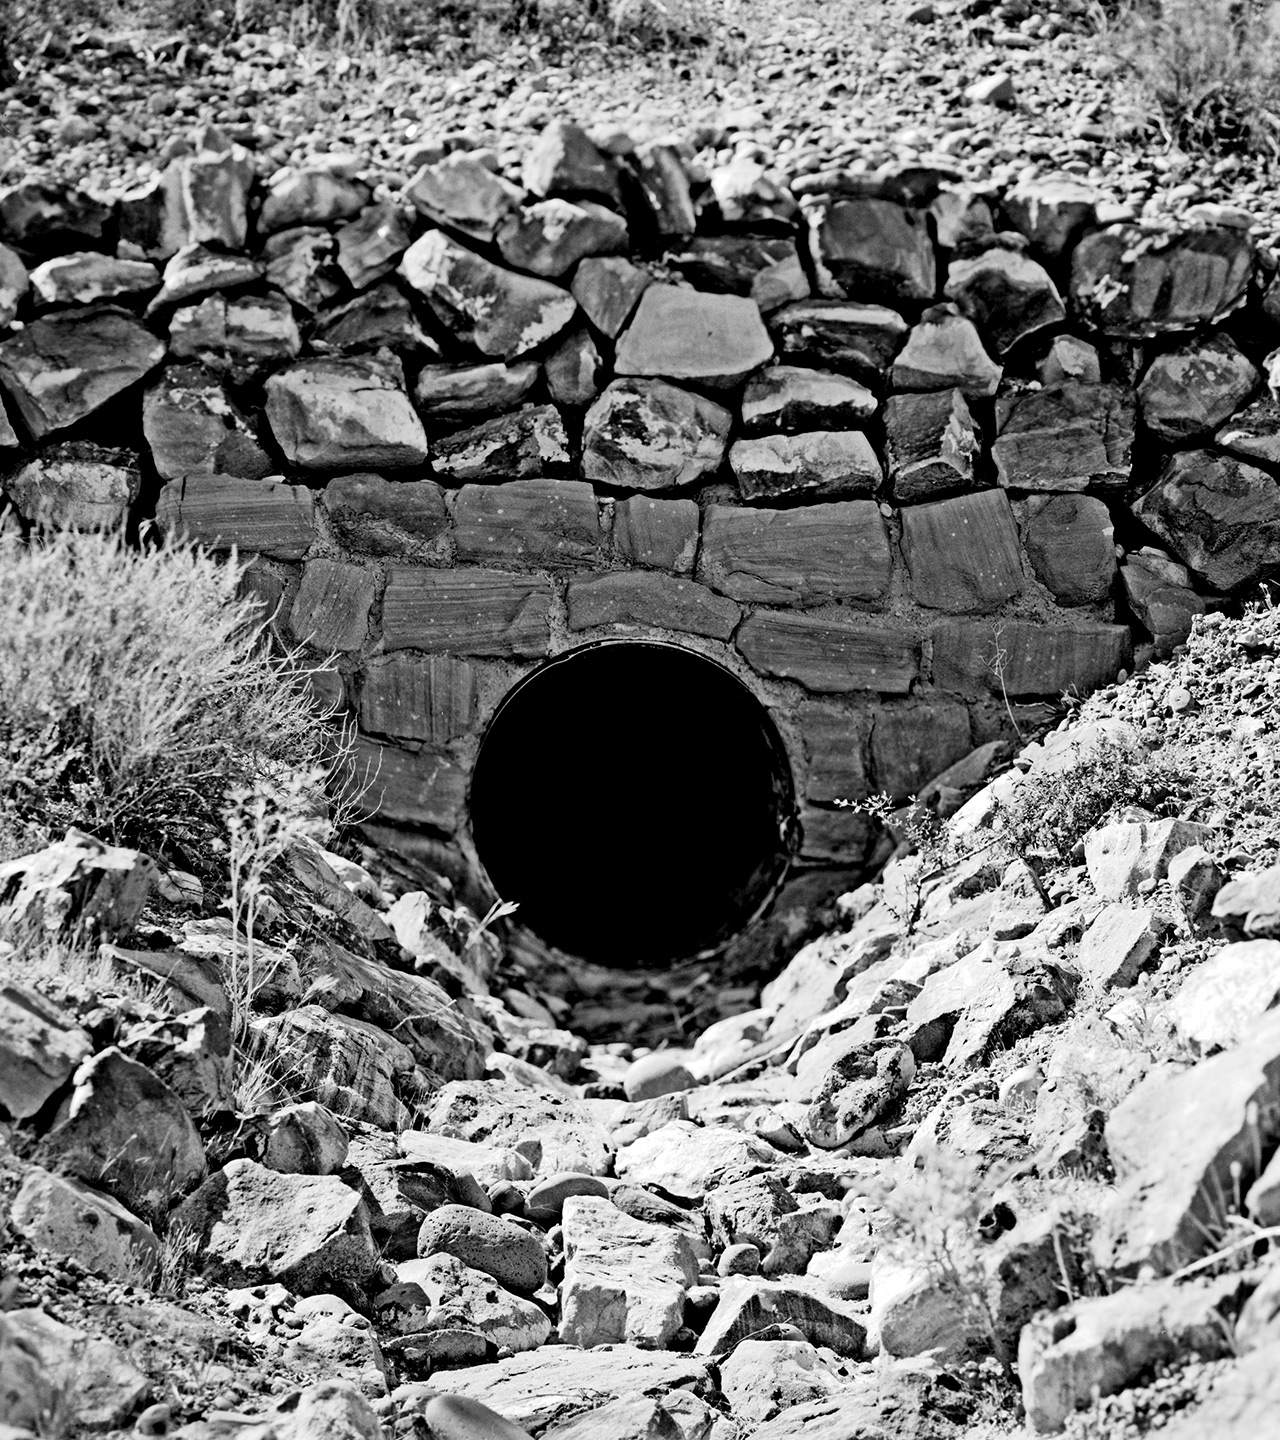 Special type culvert headwall, Culvert No. 58 Outlet, view to south - Route No. 1-Overton-Lake Mead Road, Culverts and Headwalls, 6 miles south of Overton, Overton, Clark County, NV